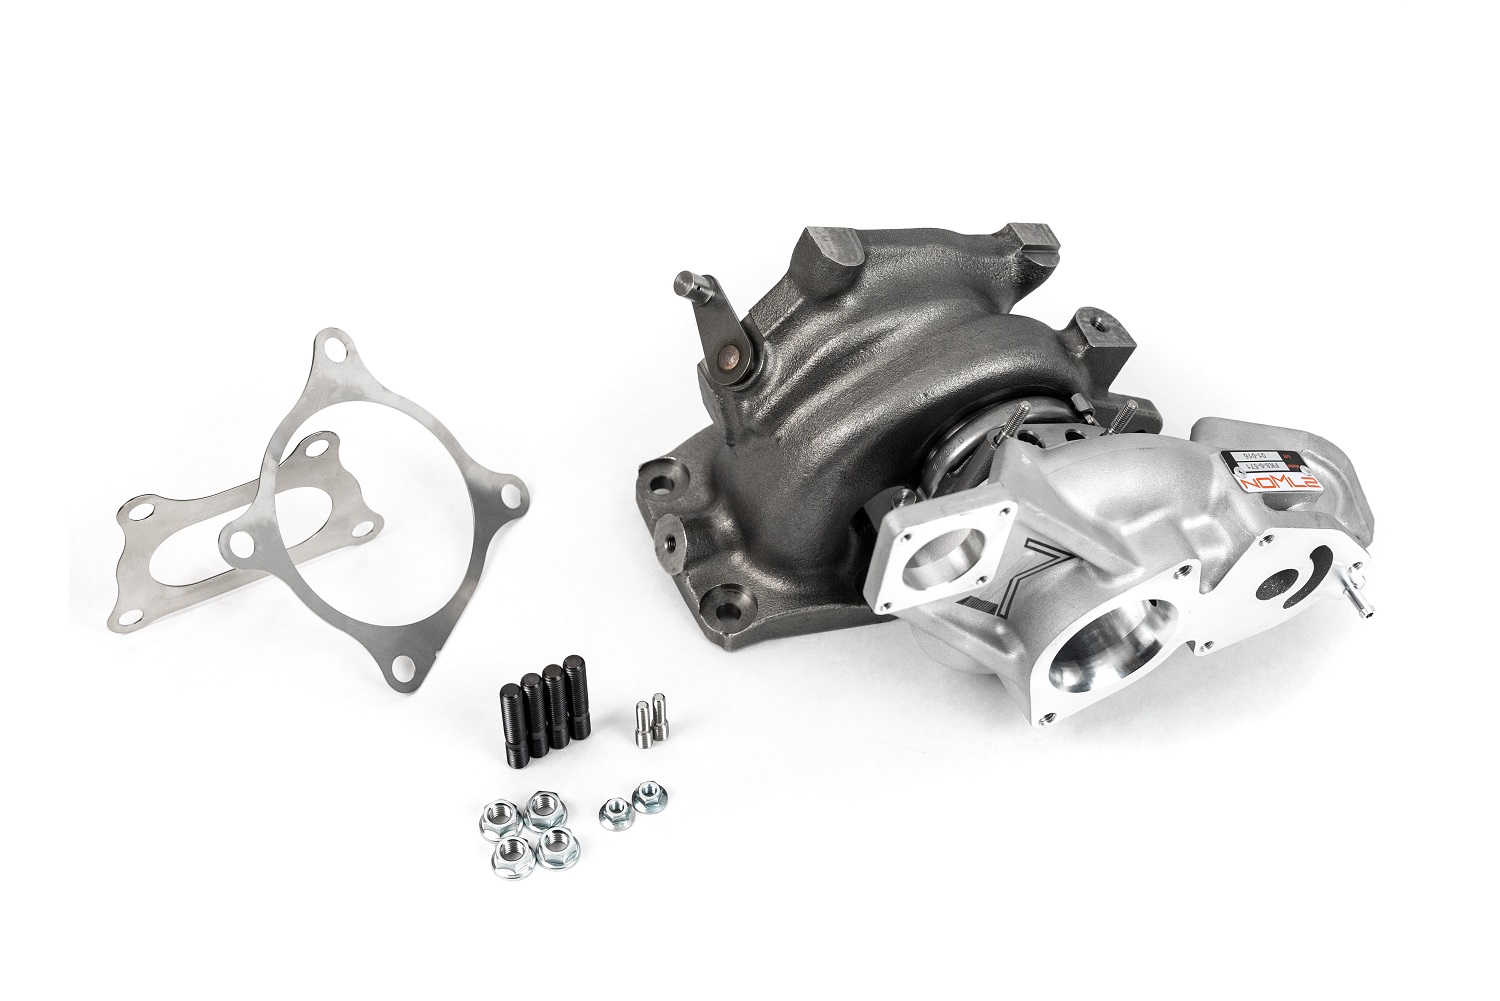 Kuro is a high performance drop-in turbocharger for the FK8 chassis